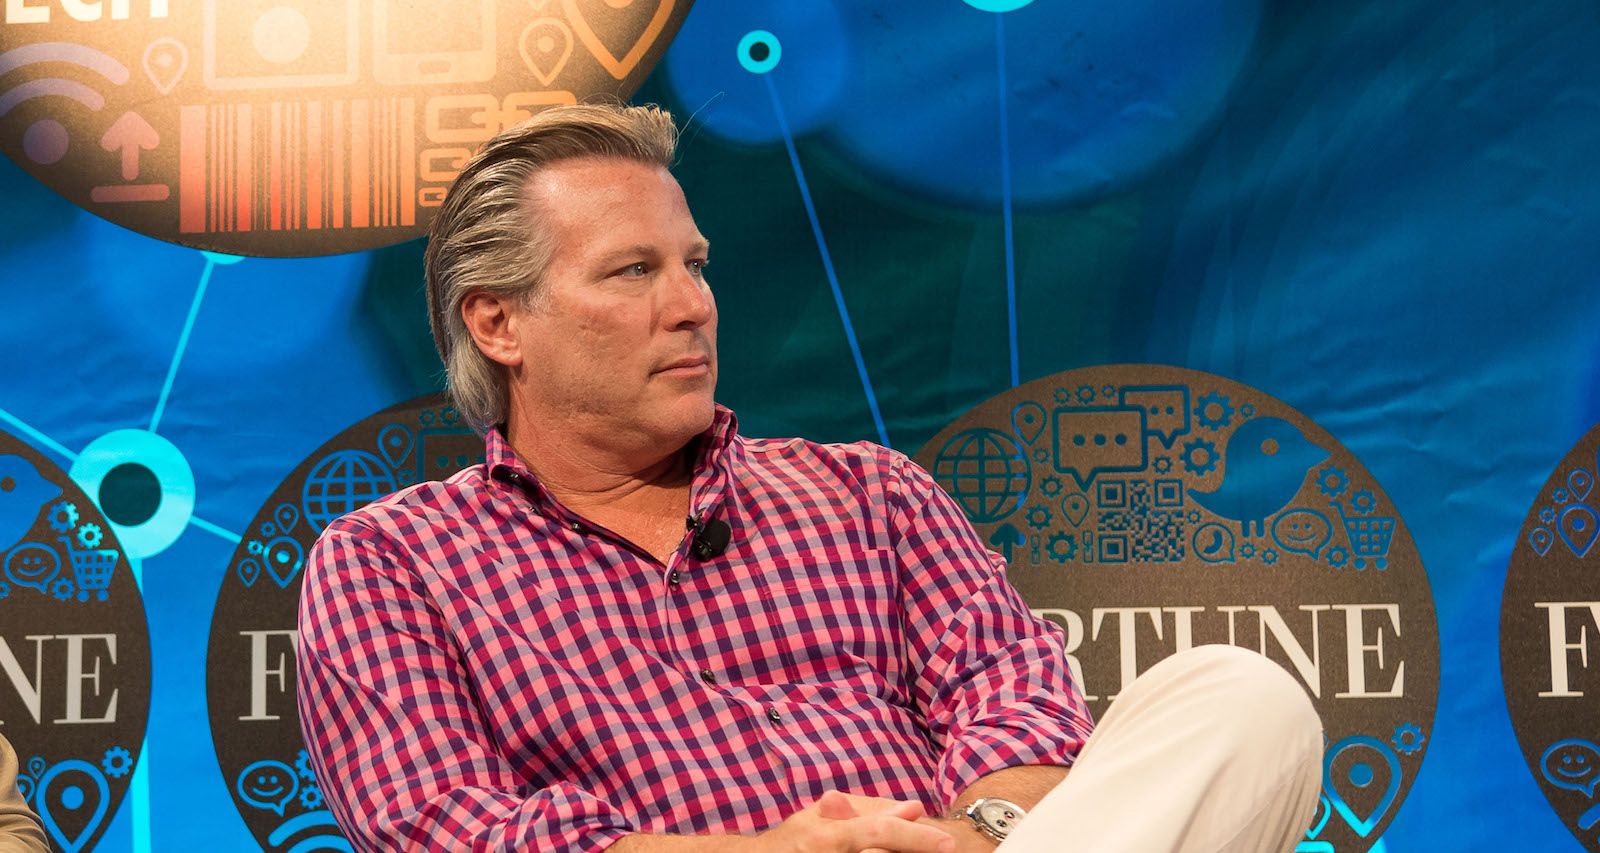 13-astounding-facts-about-ross-levinsohn